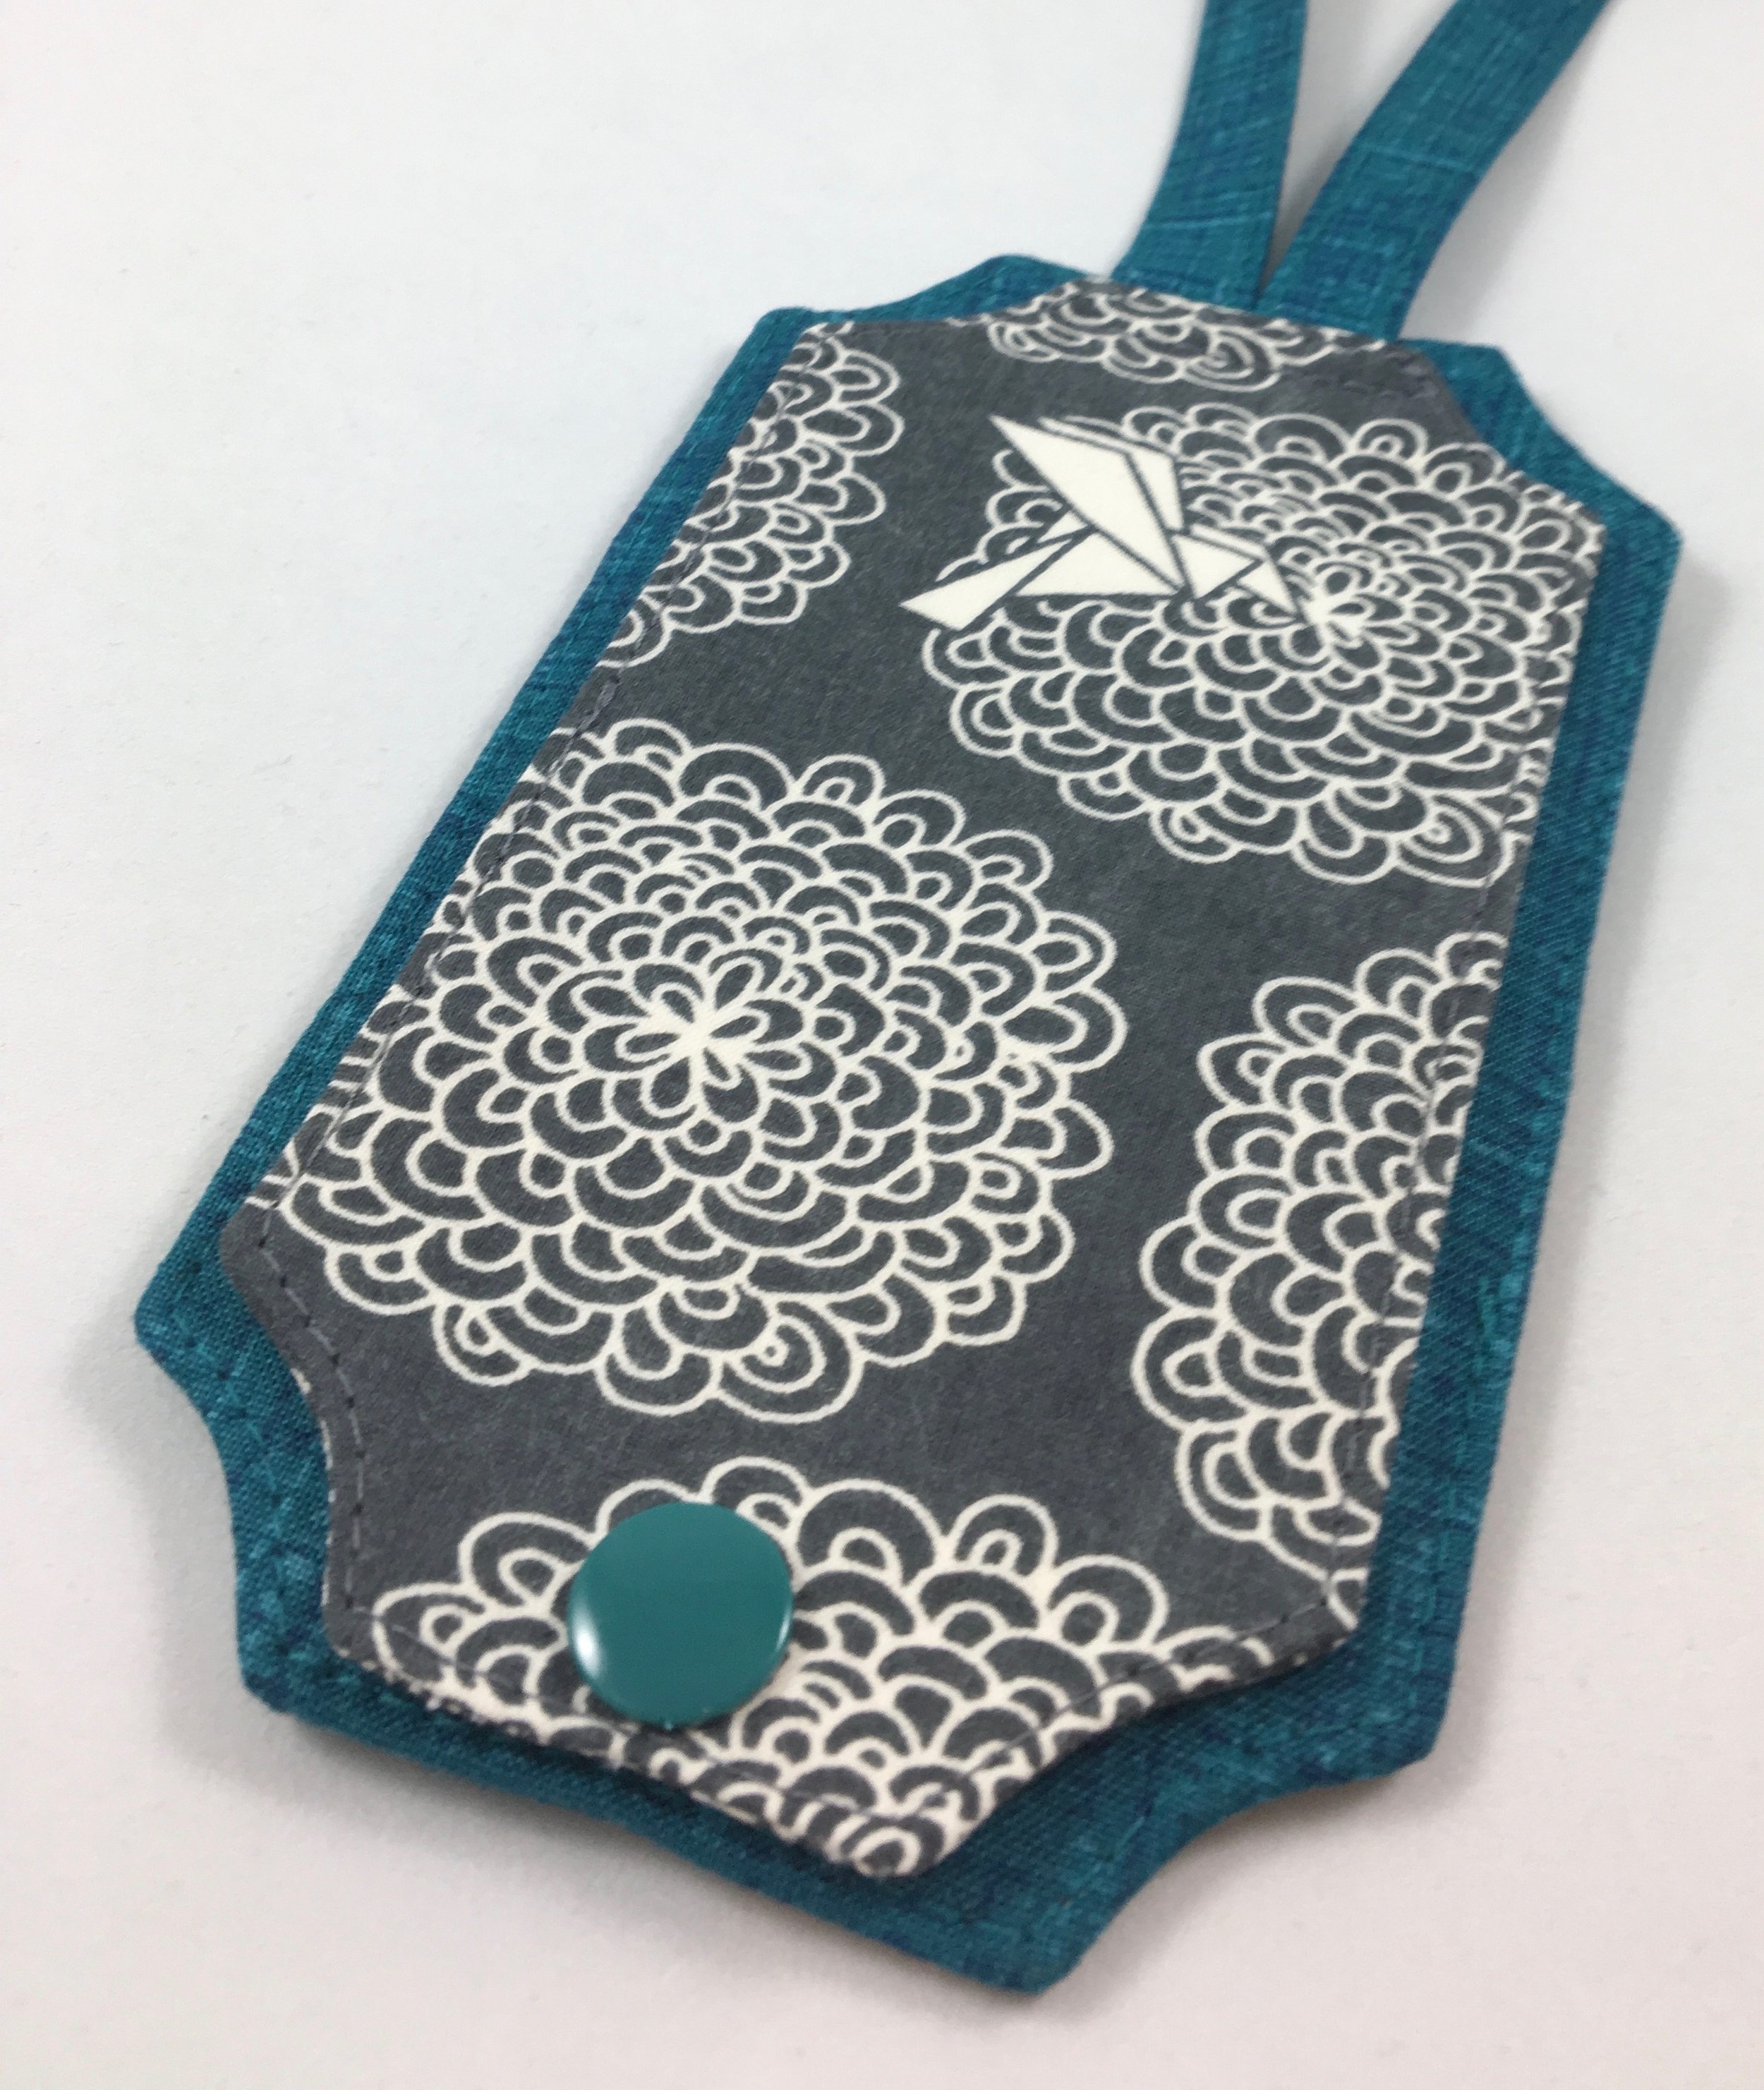 KamSnaps for Key Fobs - Embroidery Gatherings